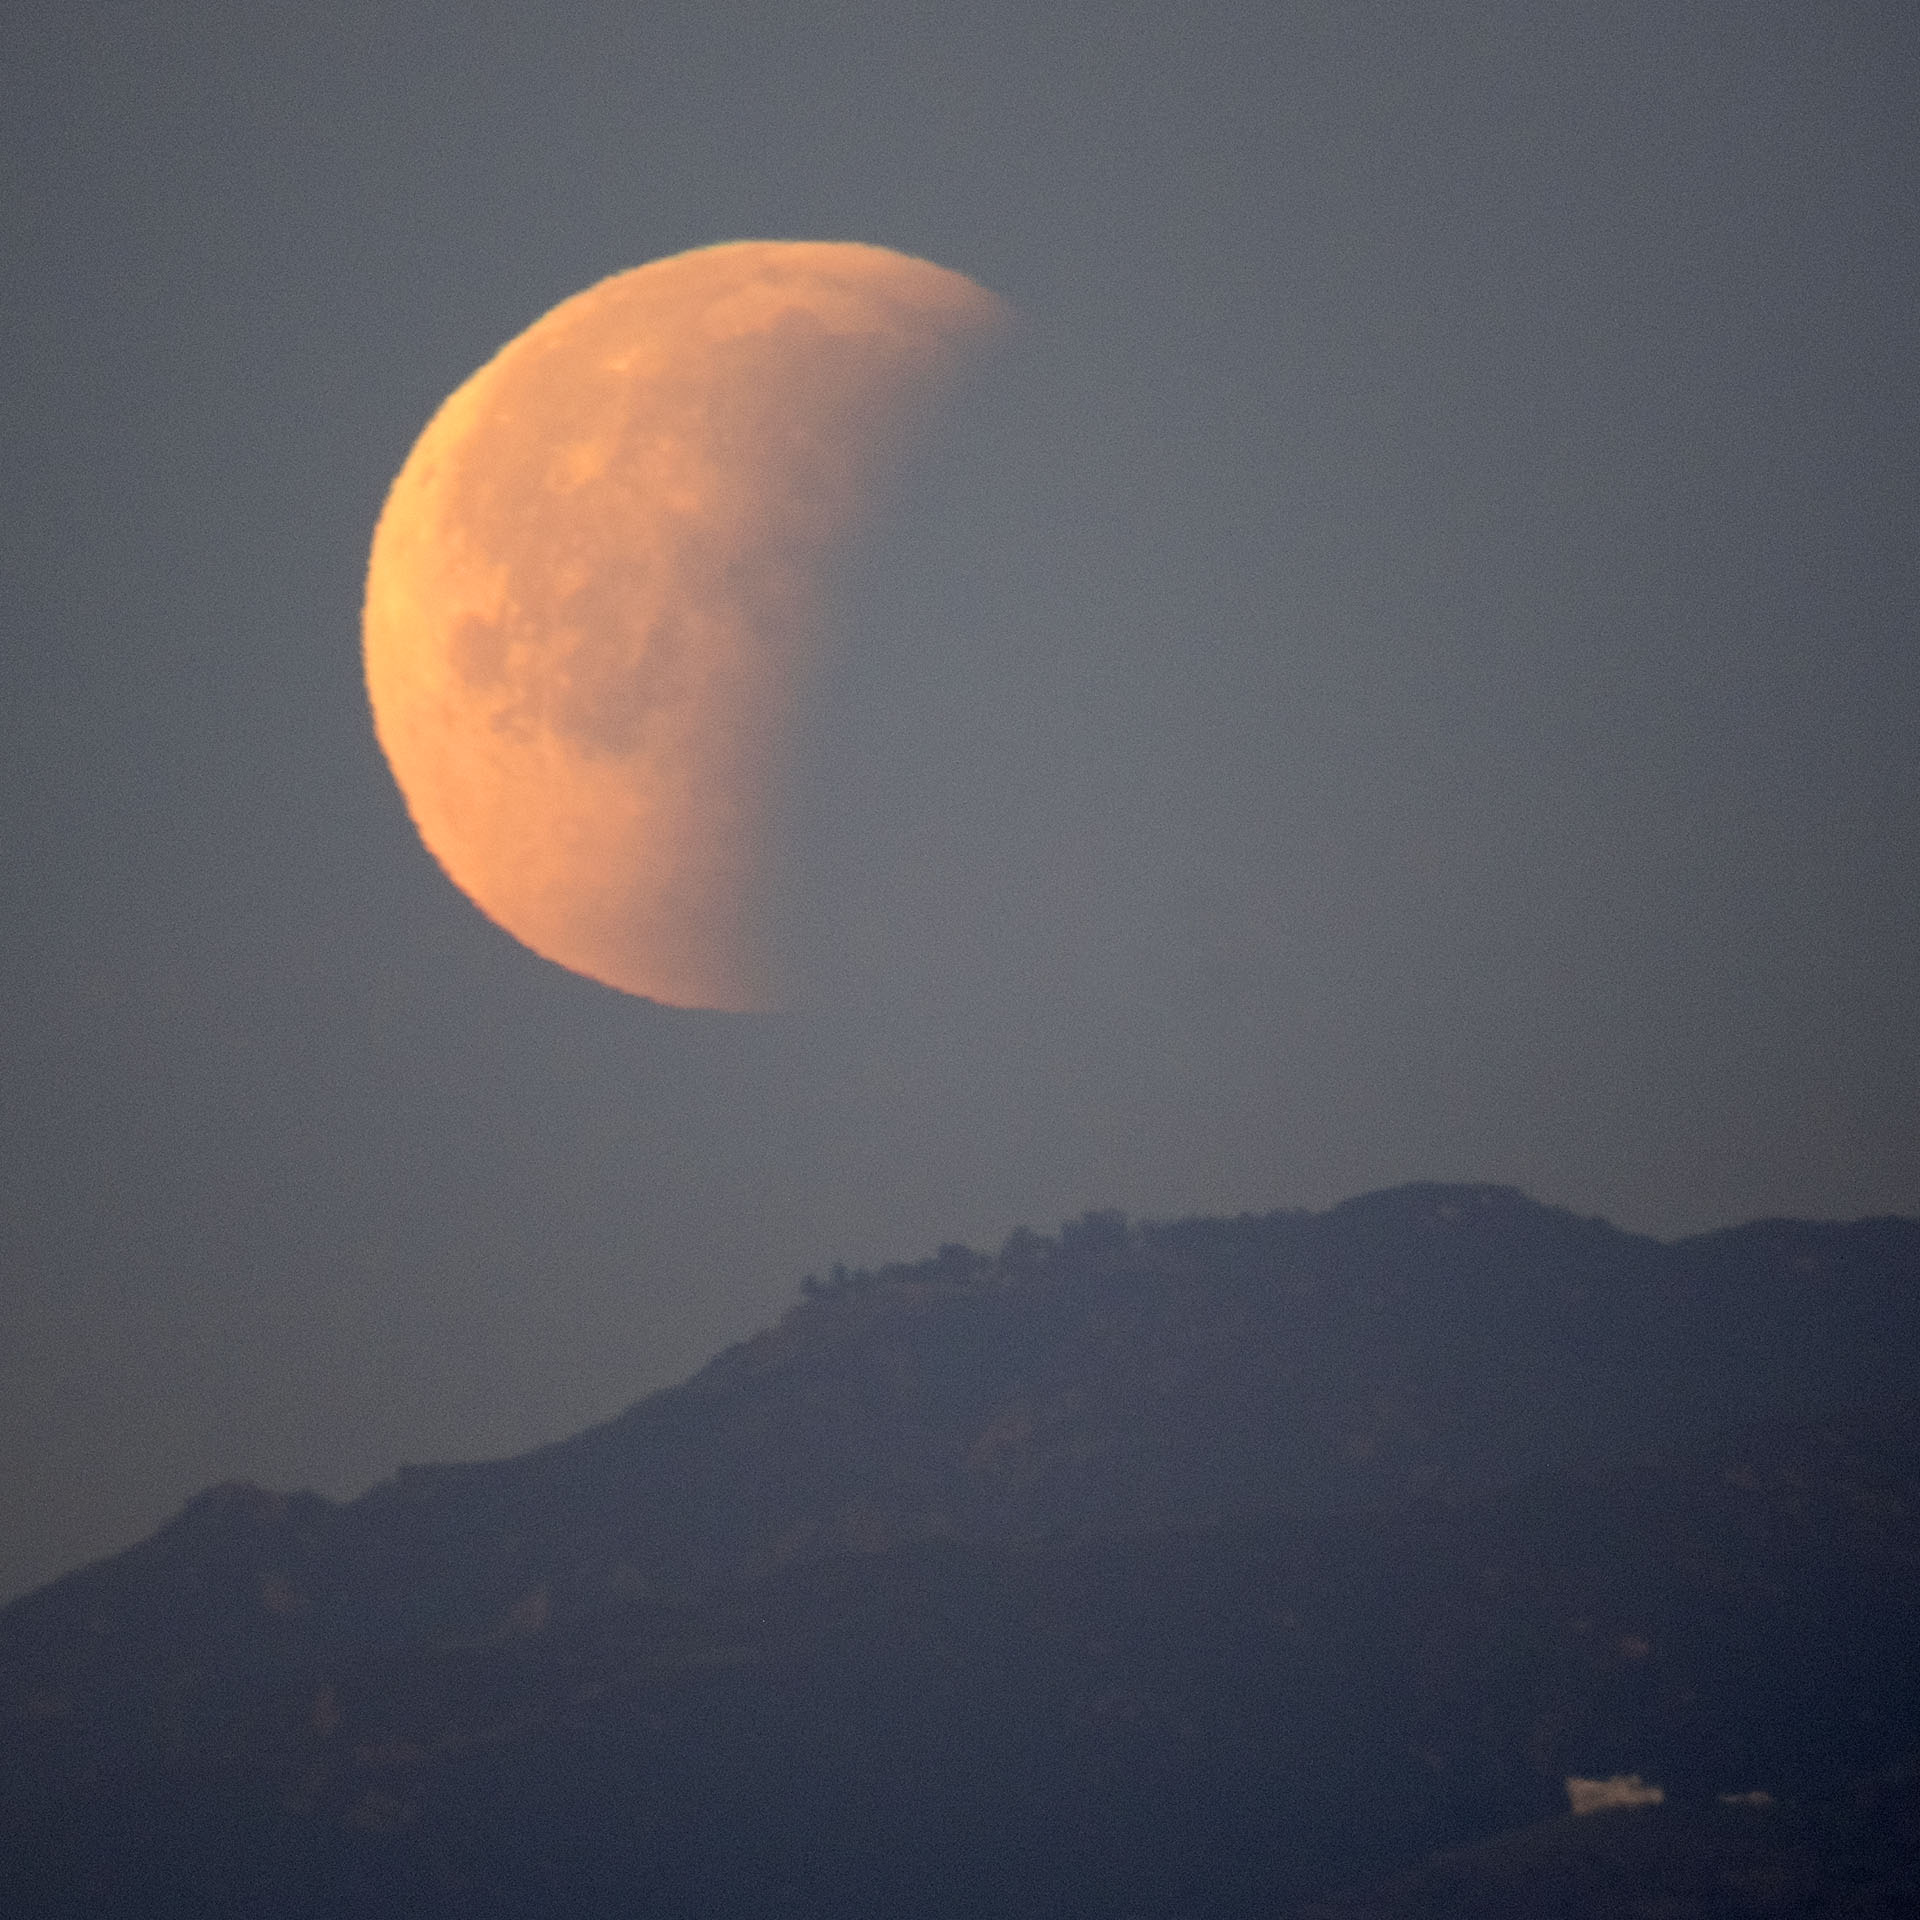 Eclipse 6: Moonset. The partially-eclipsed moon sinks behind the Santa Monica Mountains